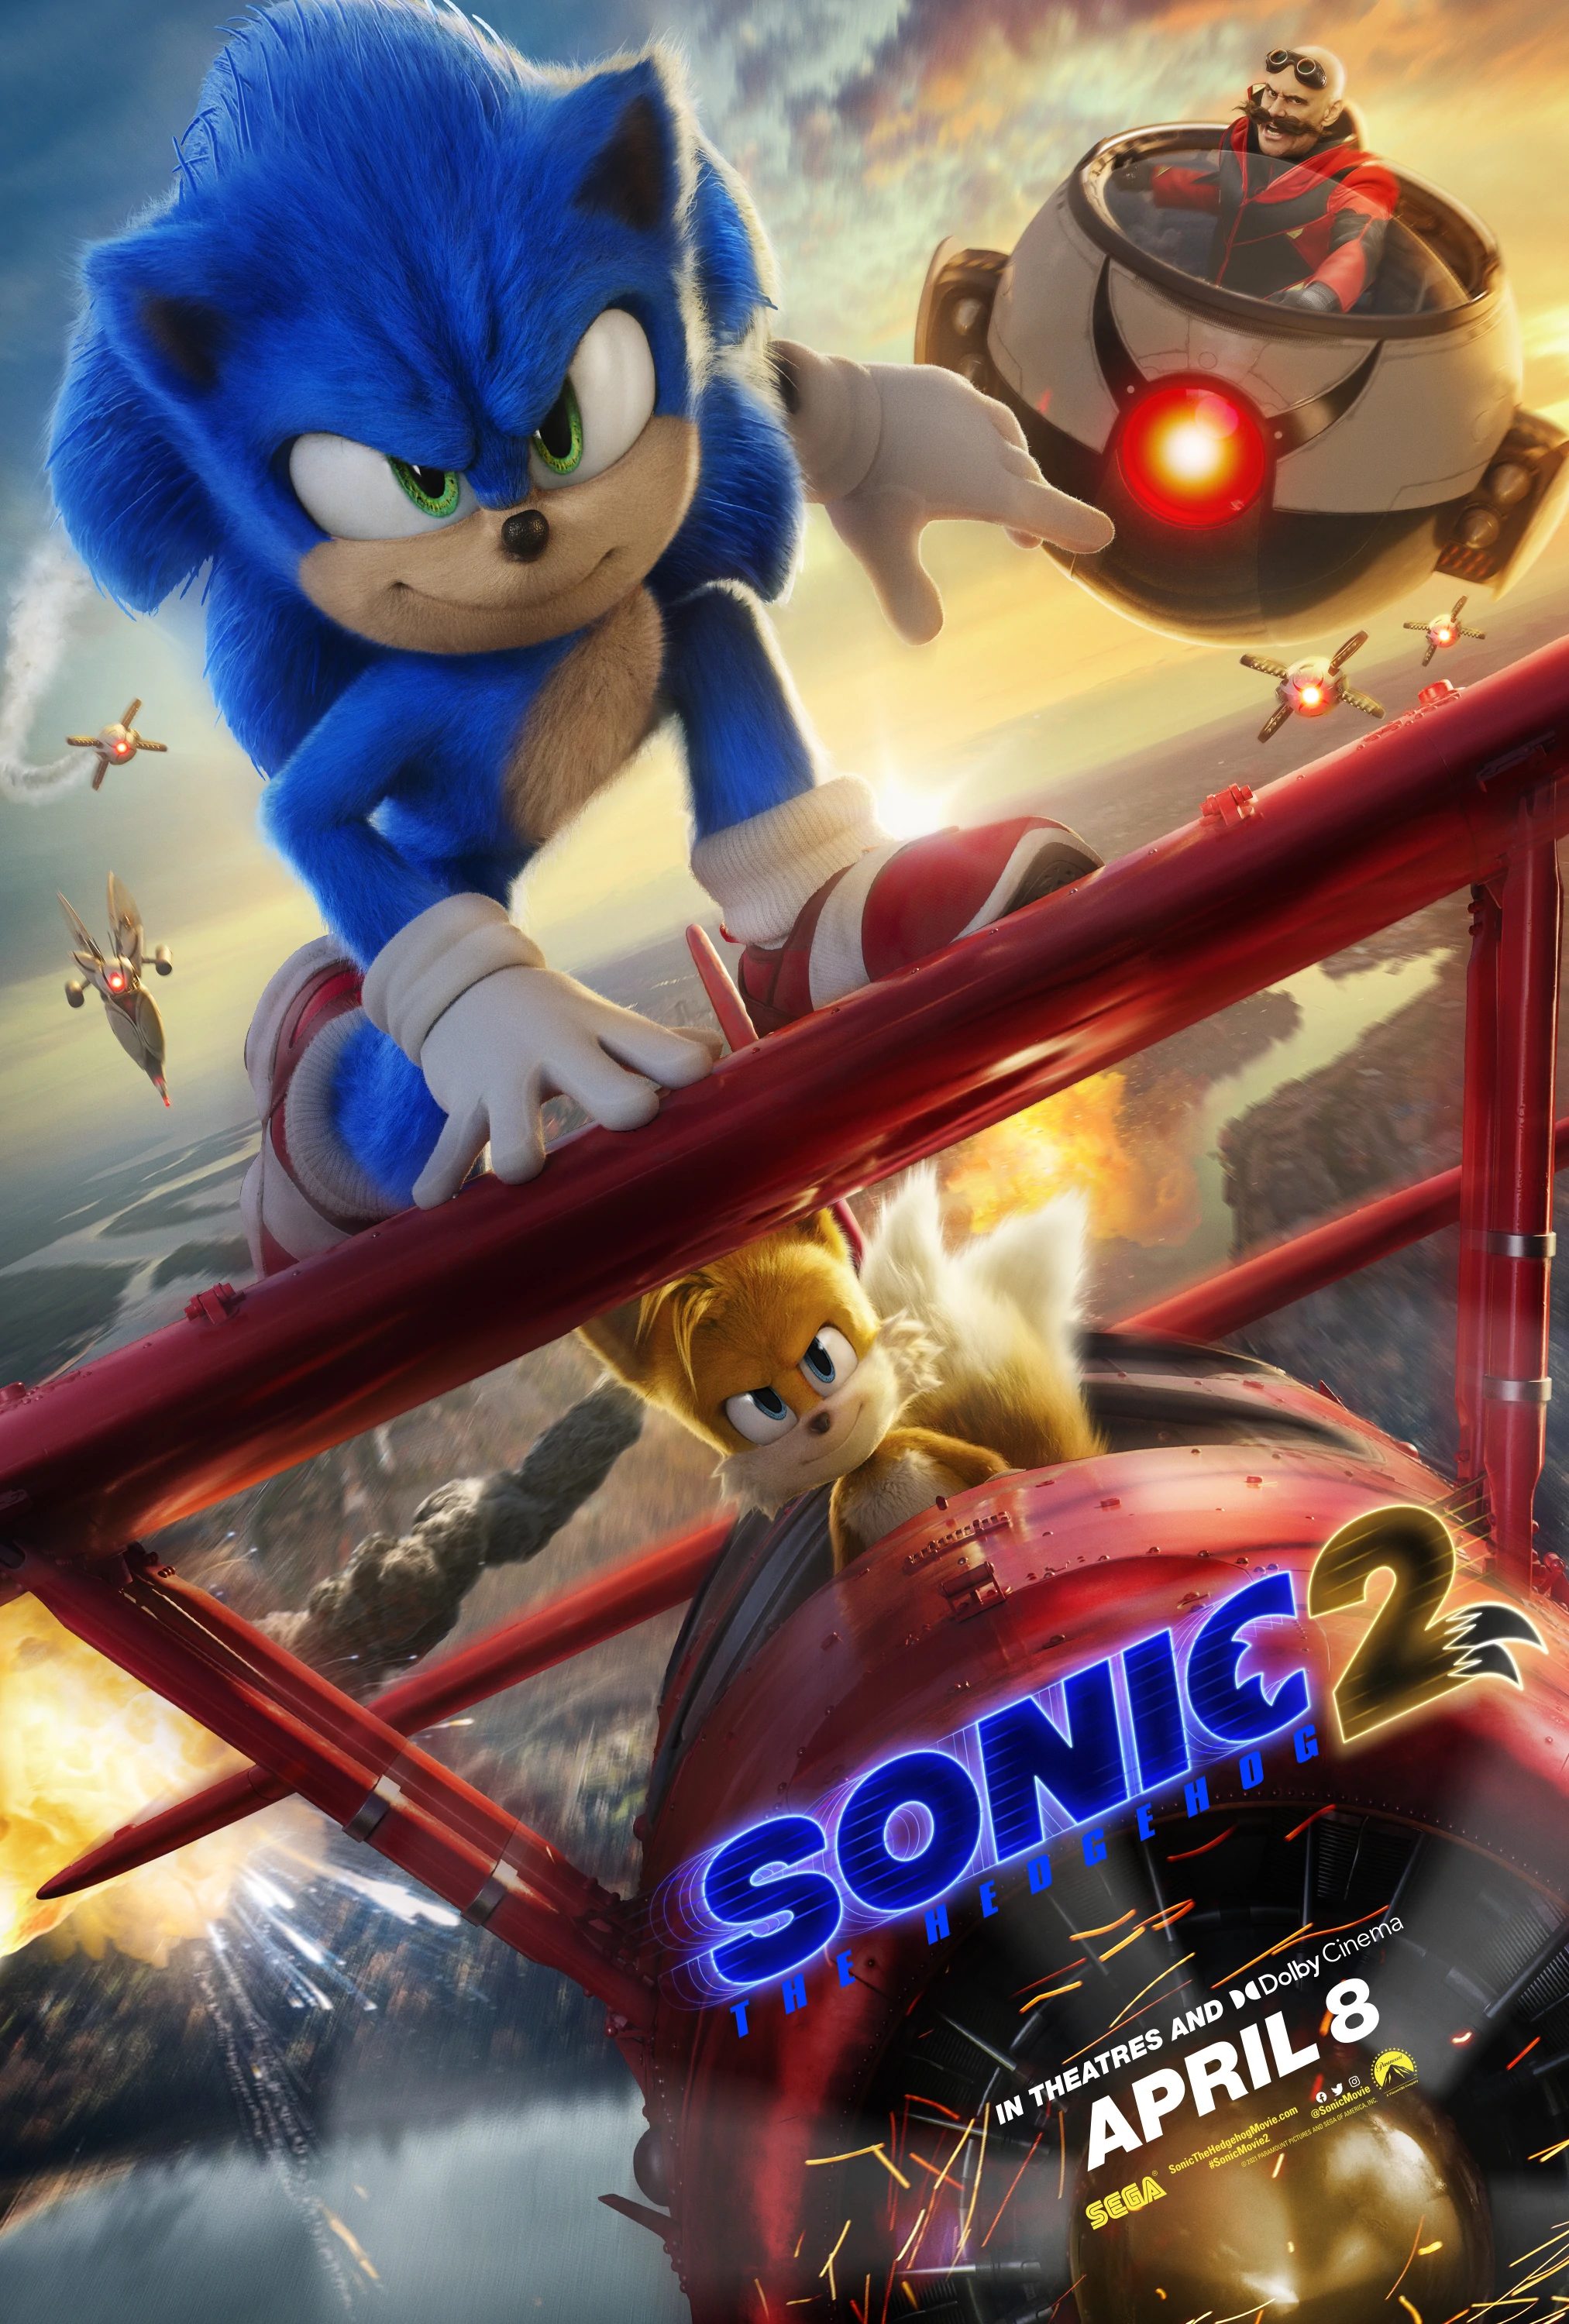 RUMOR - Leaked Sonic the Hedgehog movie info shows who Paramount